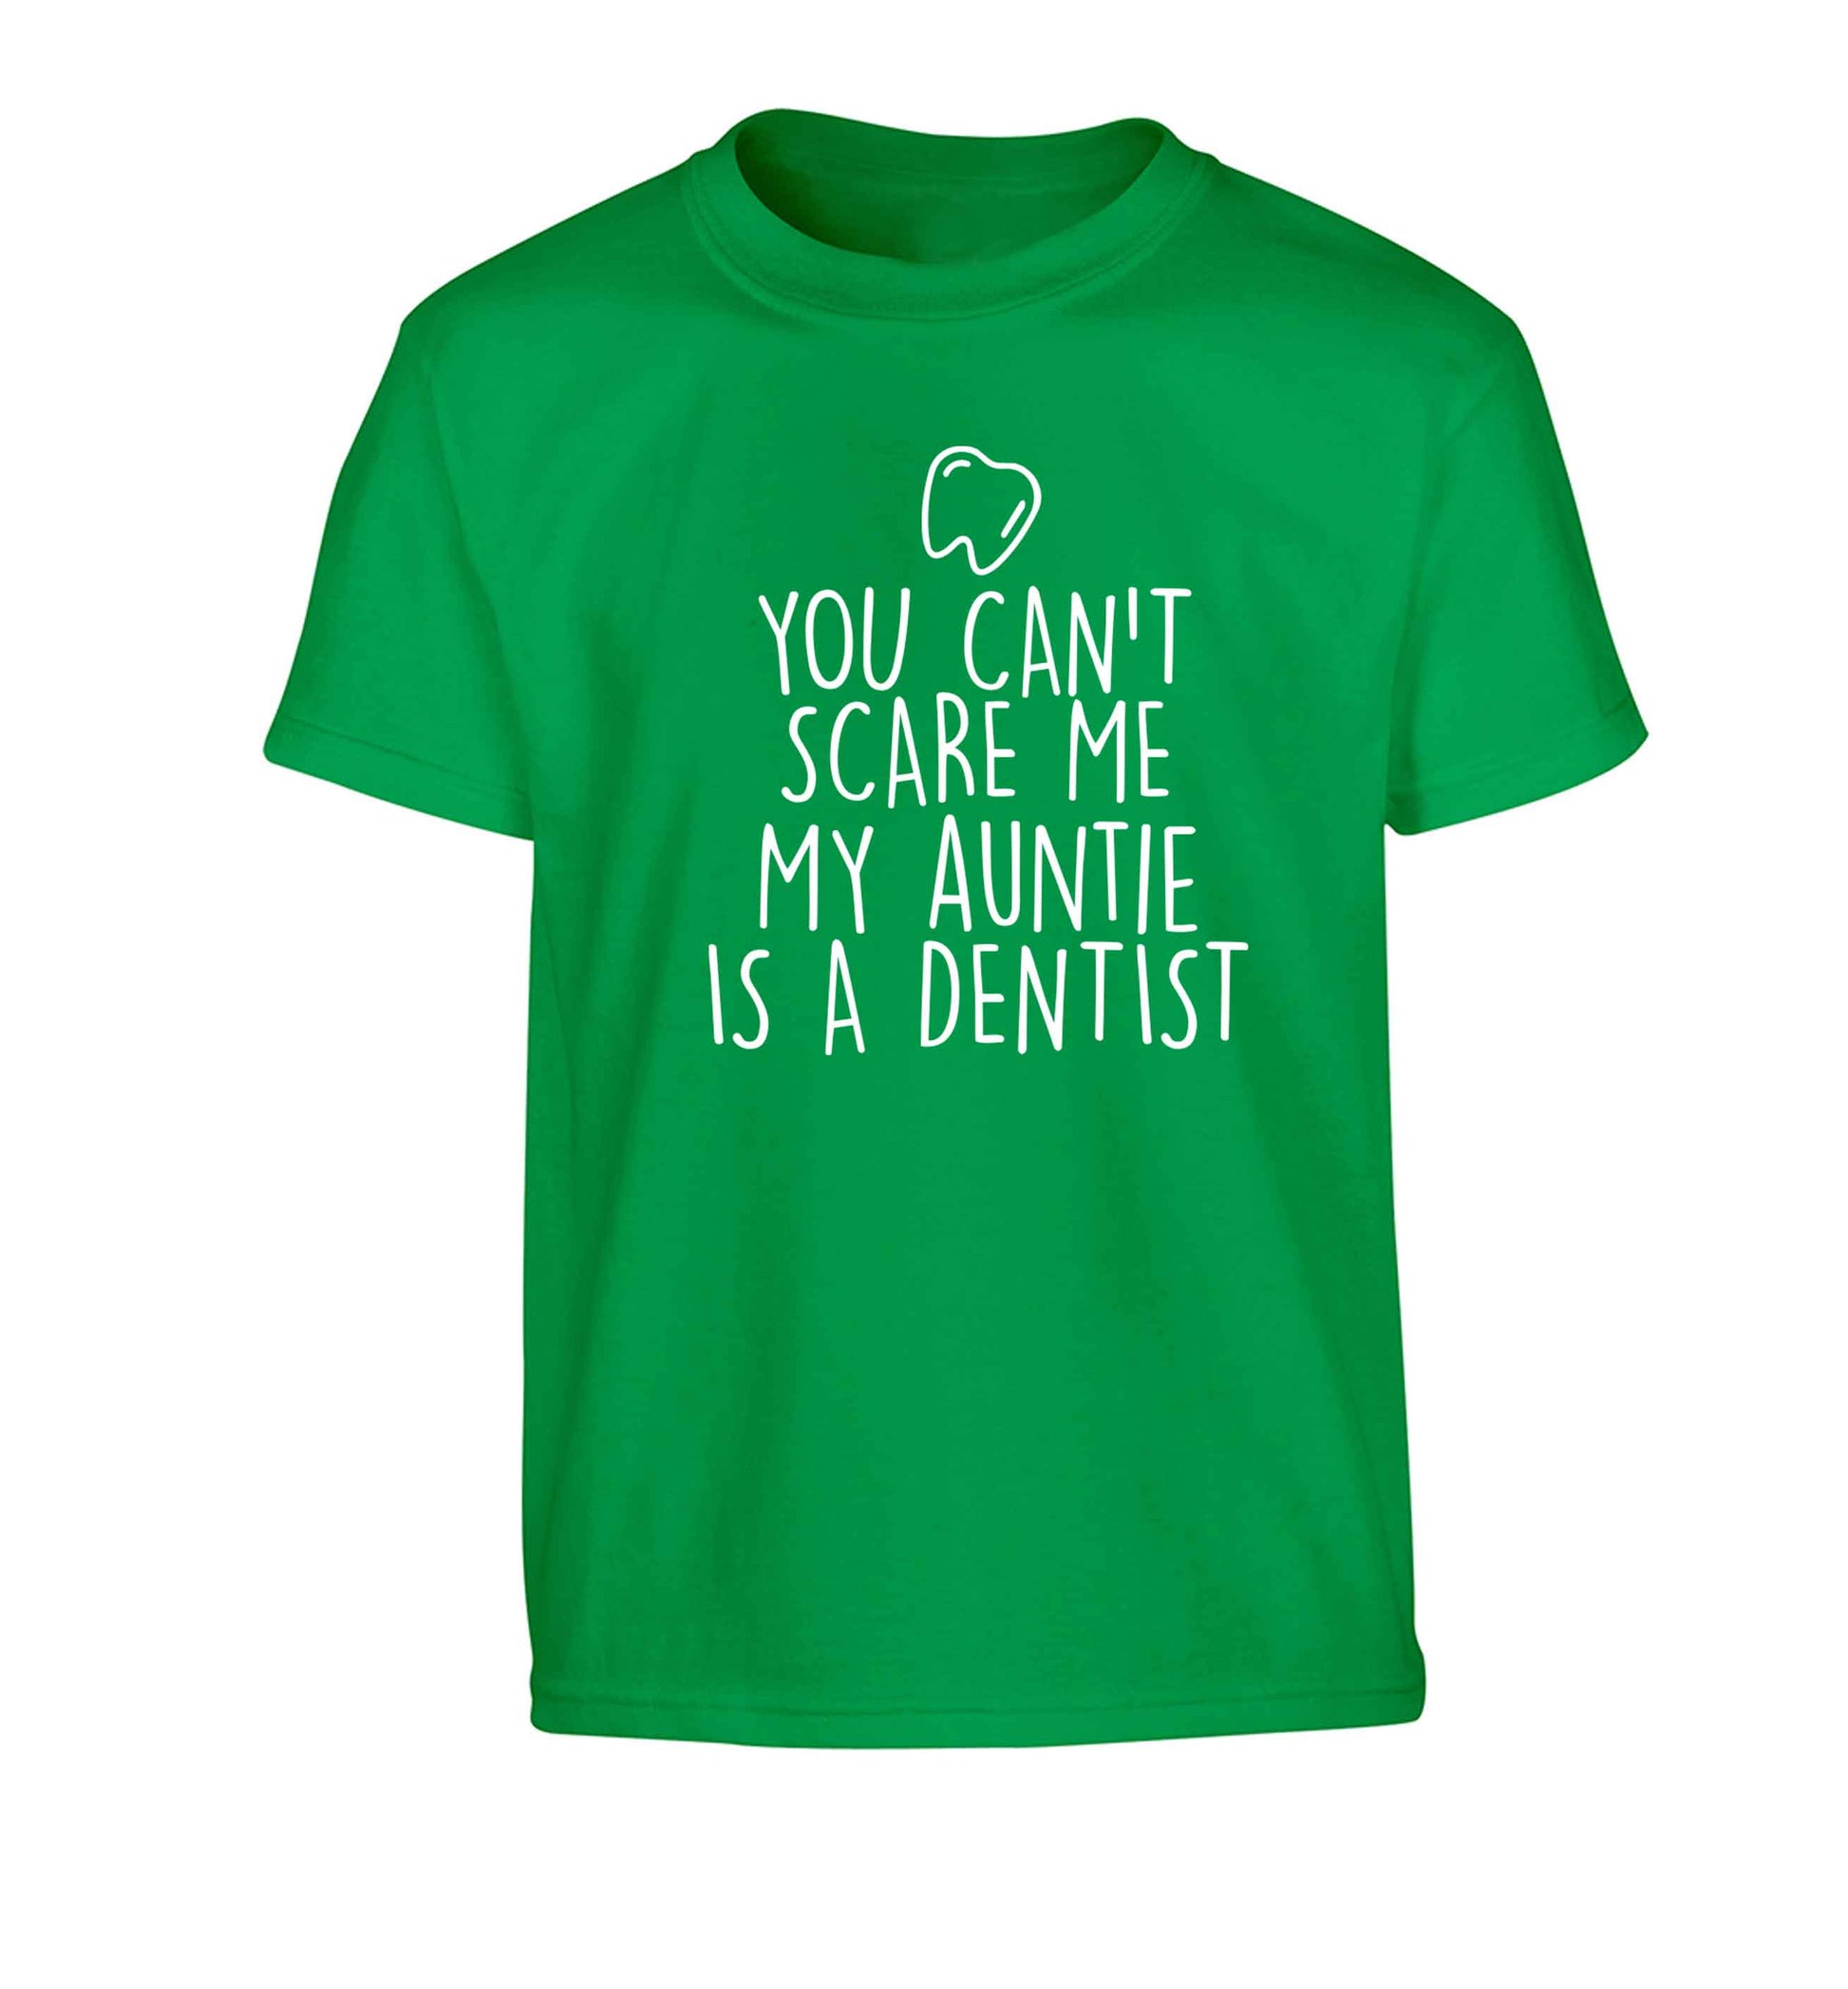 You can't scare me my auntie is a dentist Children's green Tshirt 12-13 Years